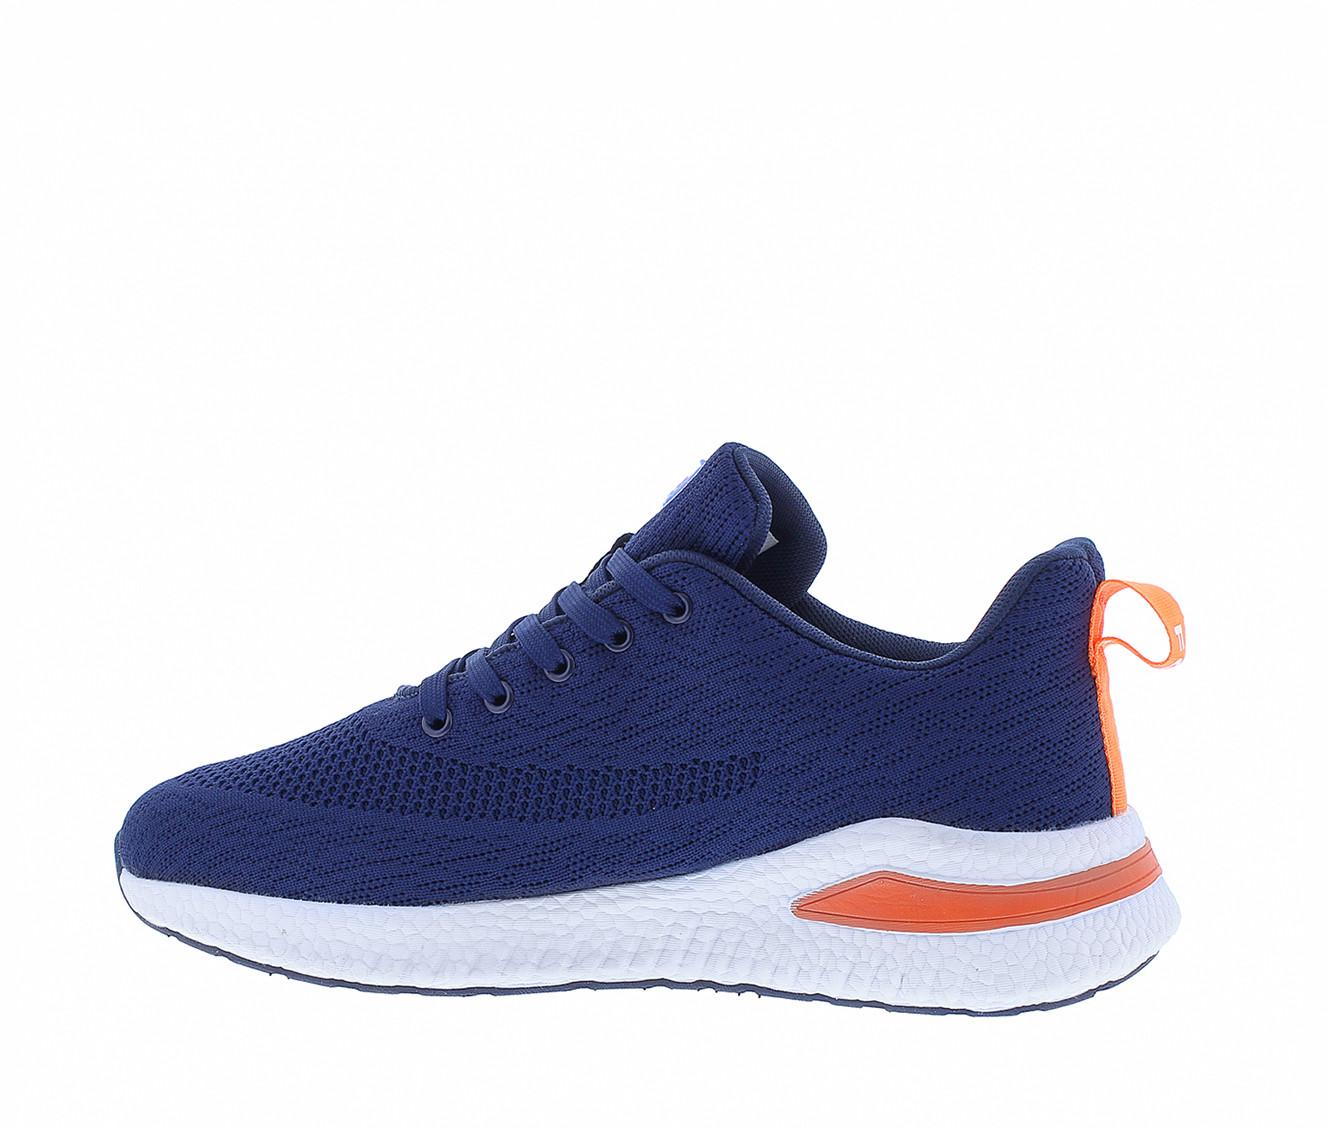 Men's French Connection Storm Sneakers